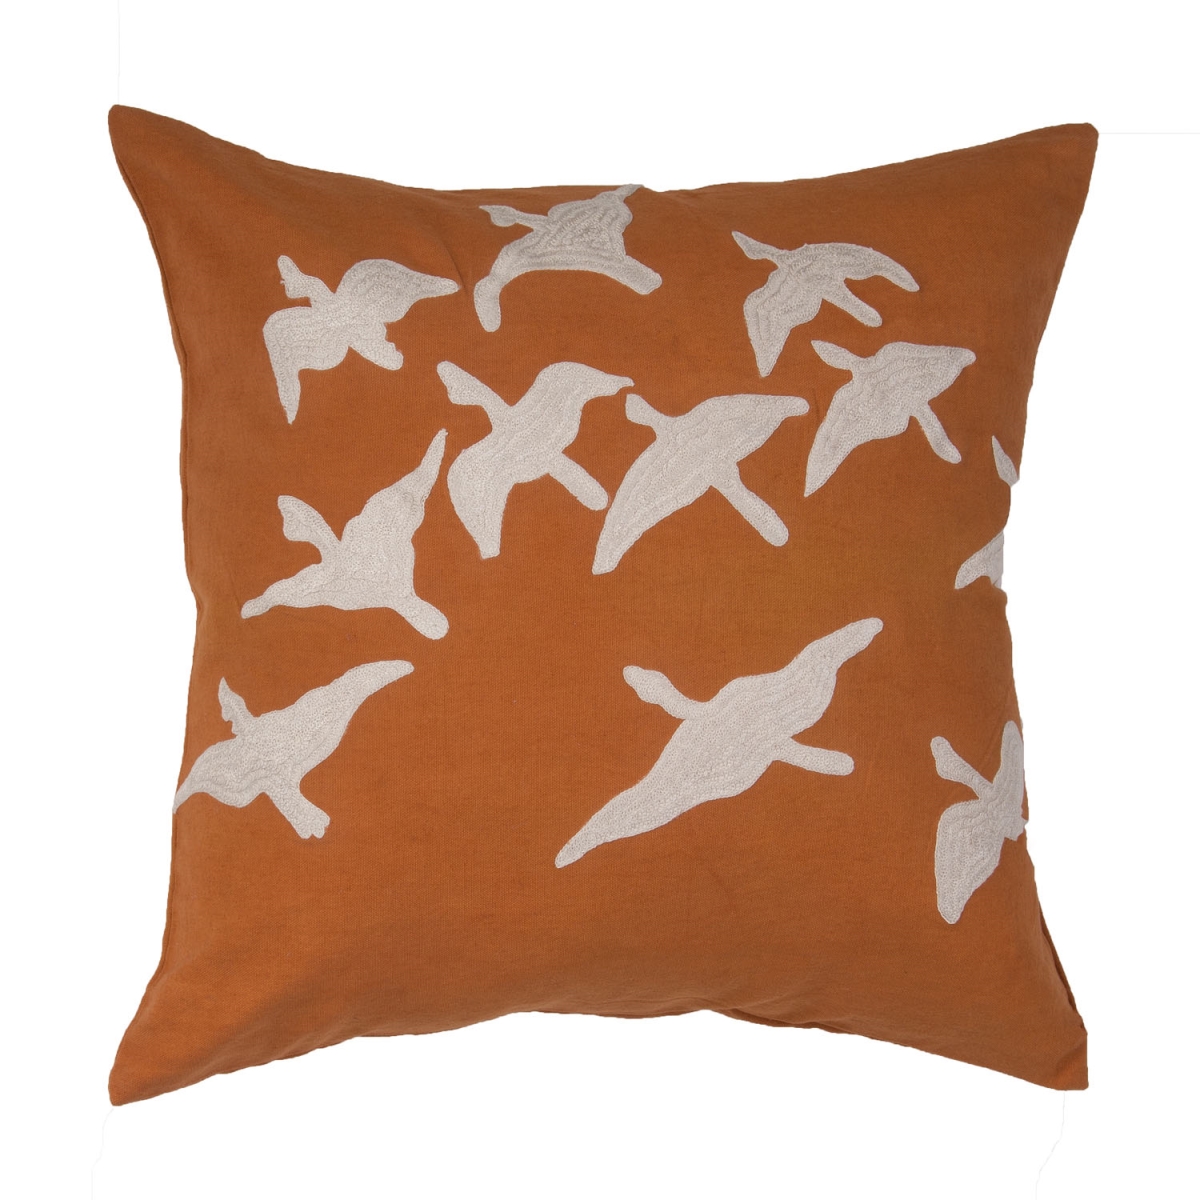 Plw102405 20 X 20 In. National Geographic Home Collection Safiya Orange & Ivory Animal Poly Throw Pillow